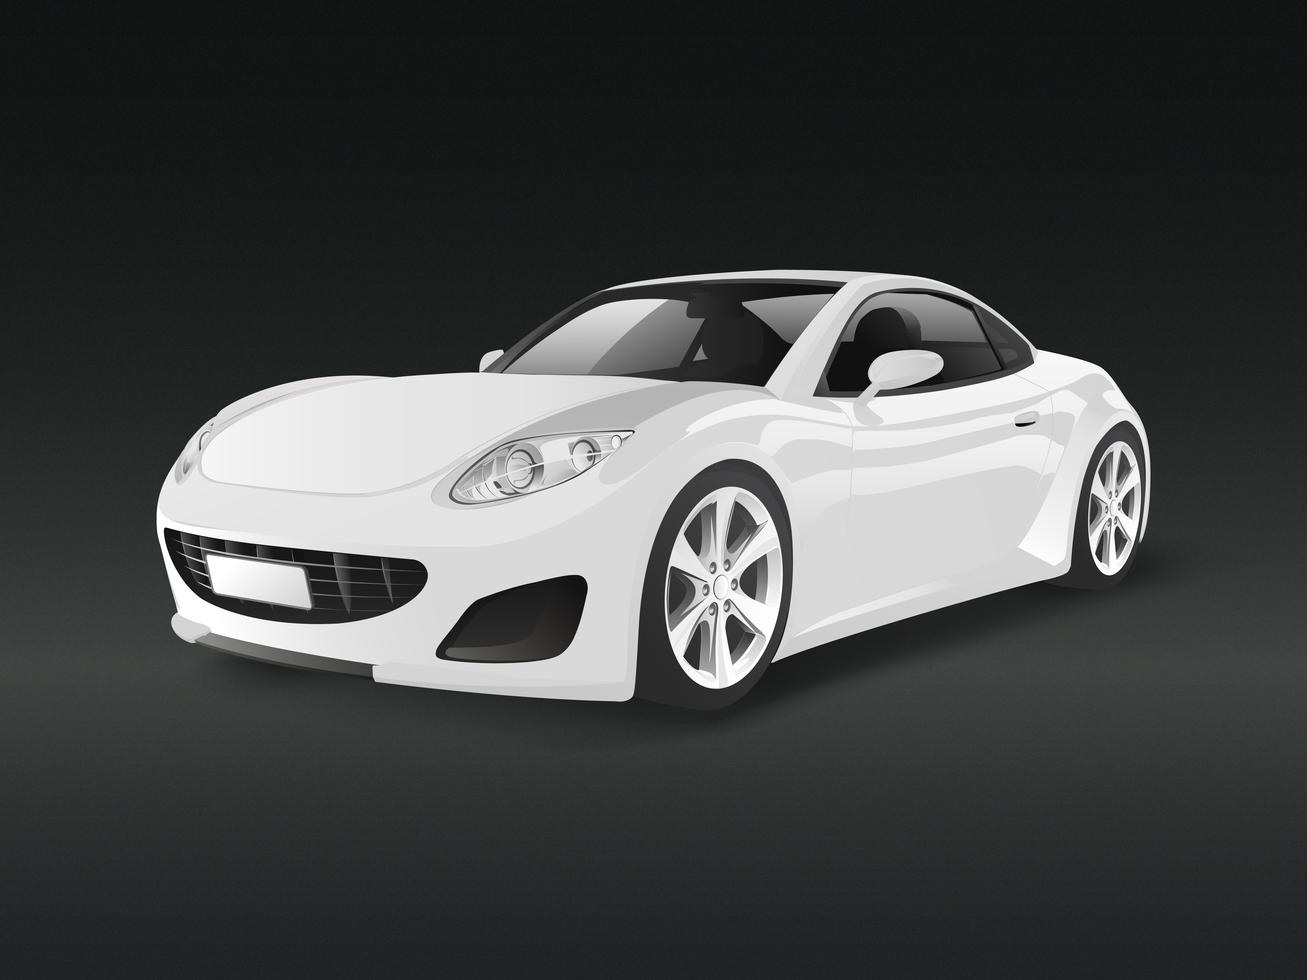 White sports car in a black background vector - Download Free Vectors ...